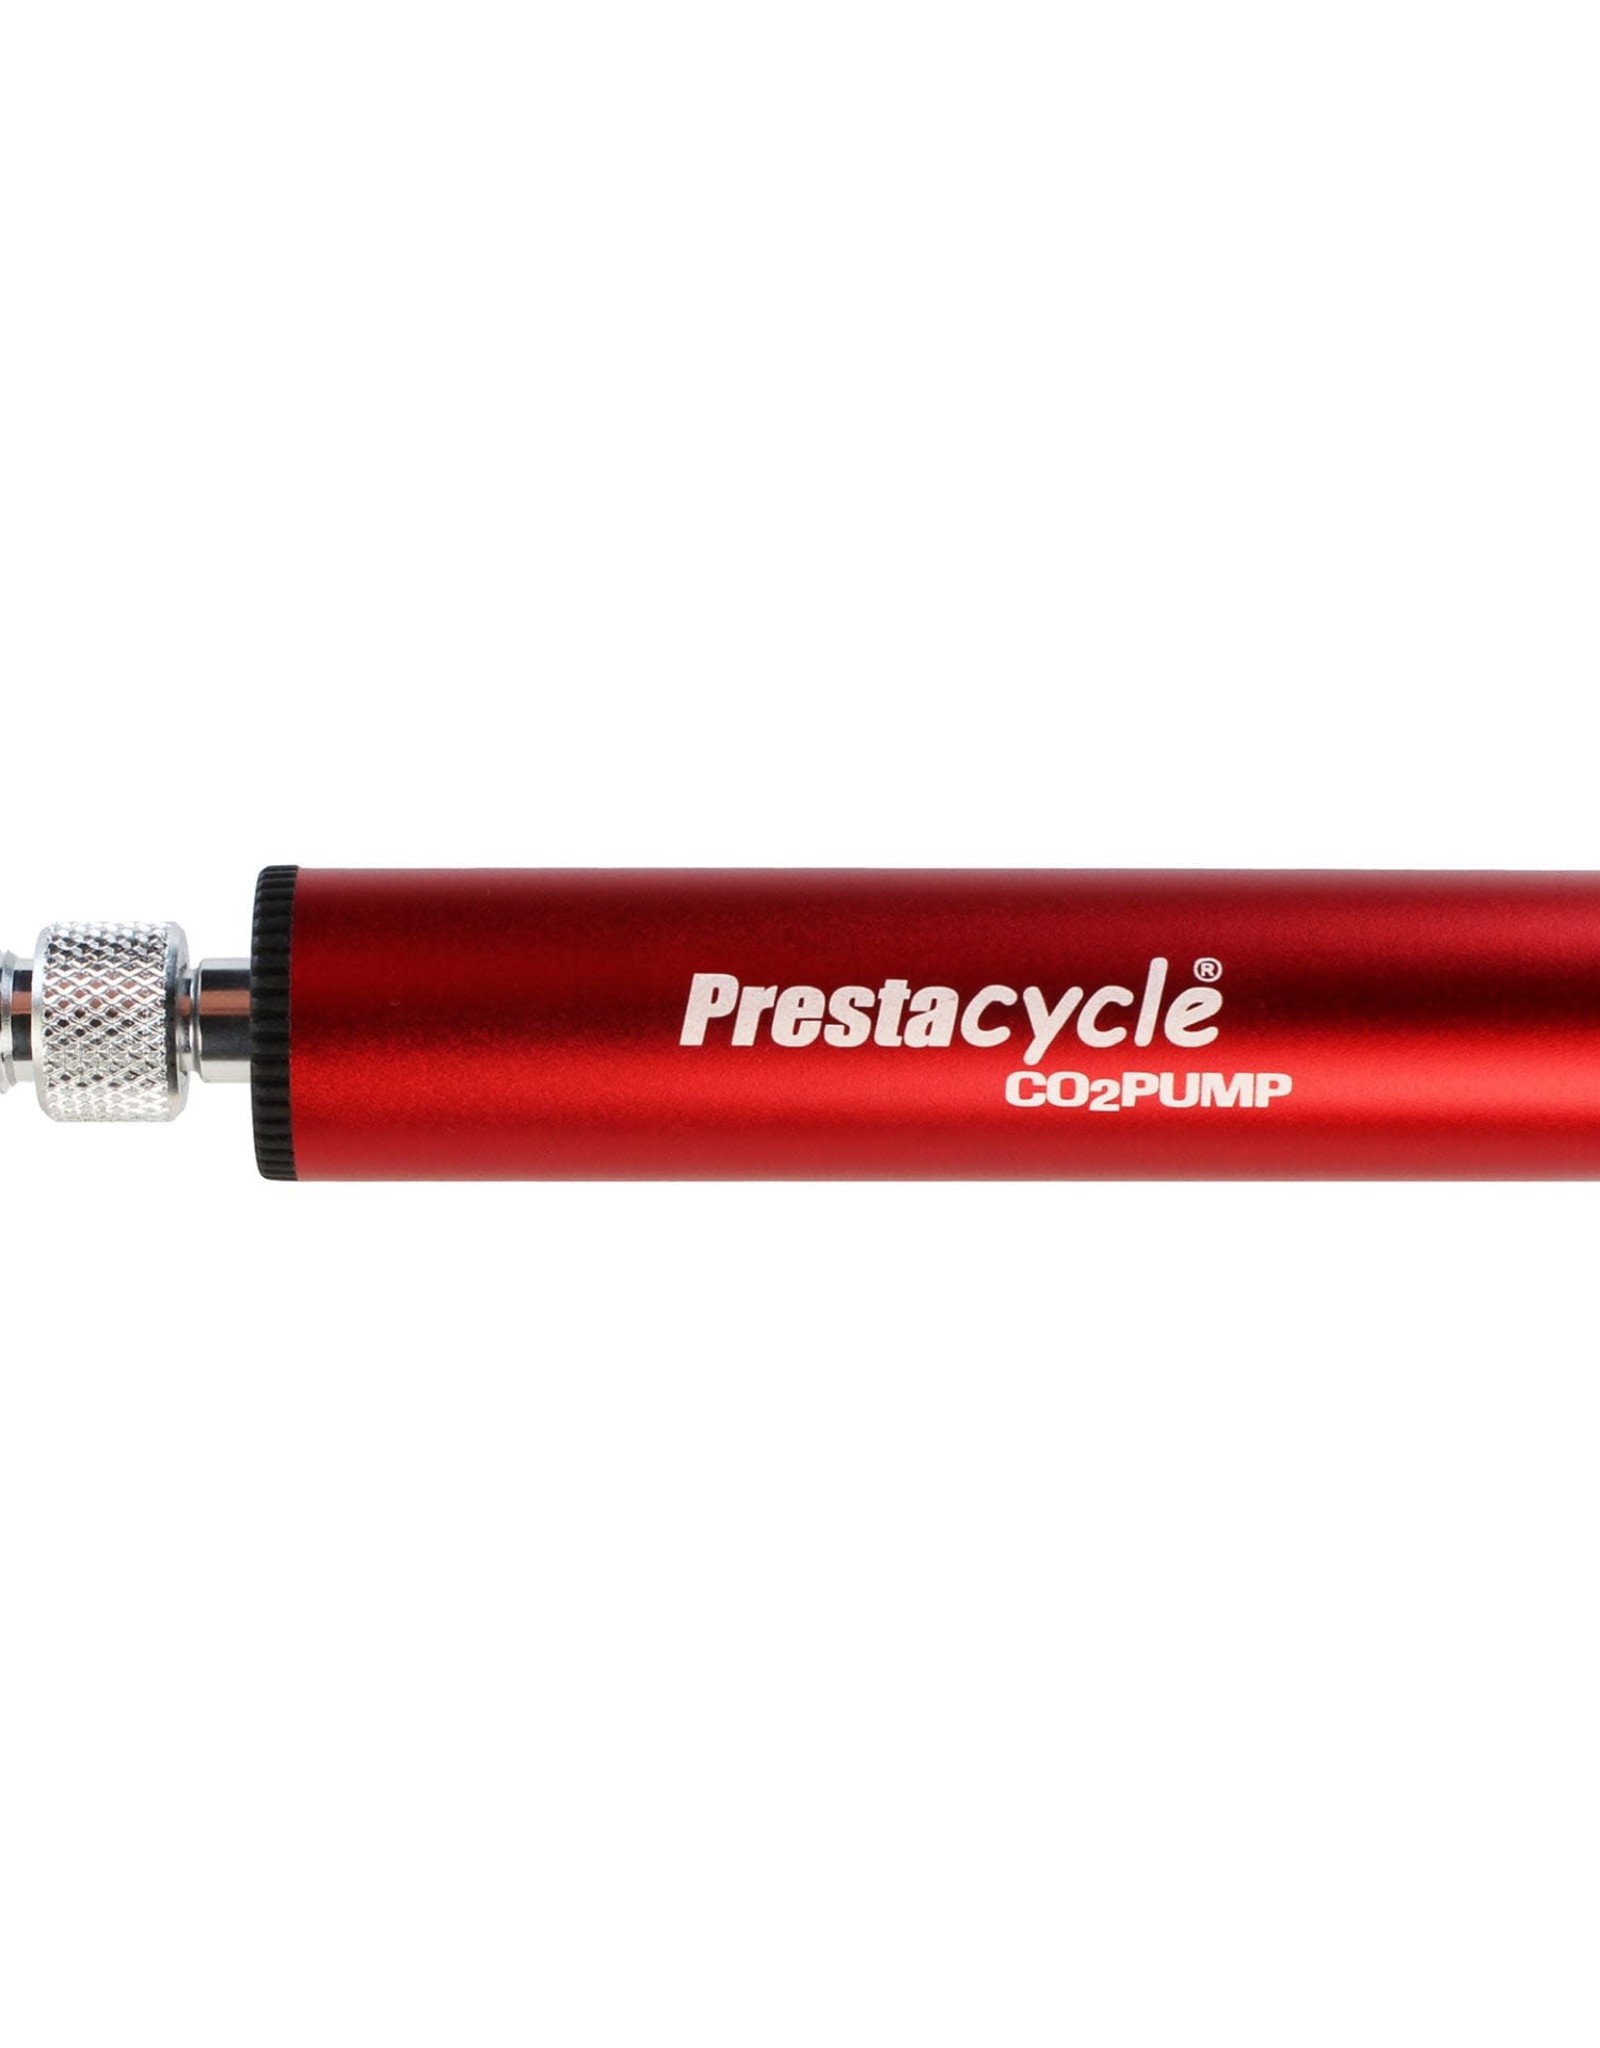 PrestaCycle Micro CO2inflator, cartridge, cover, and pump